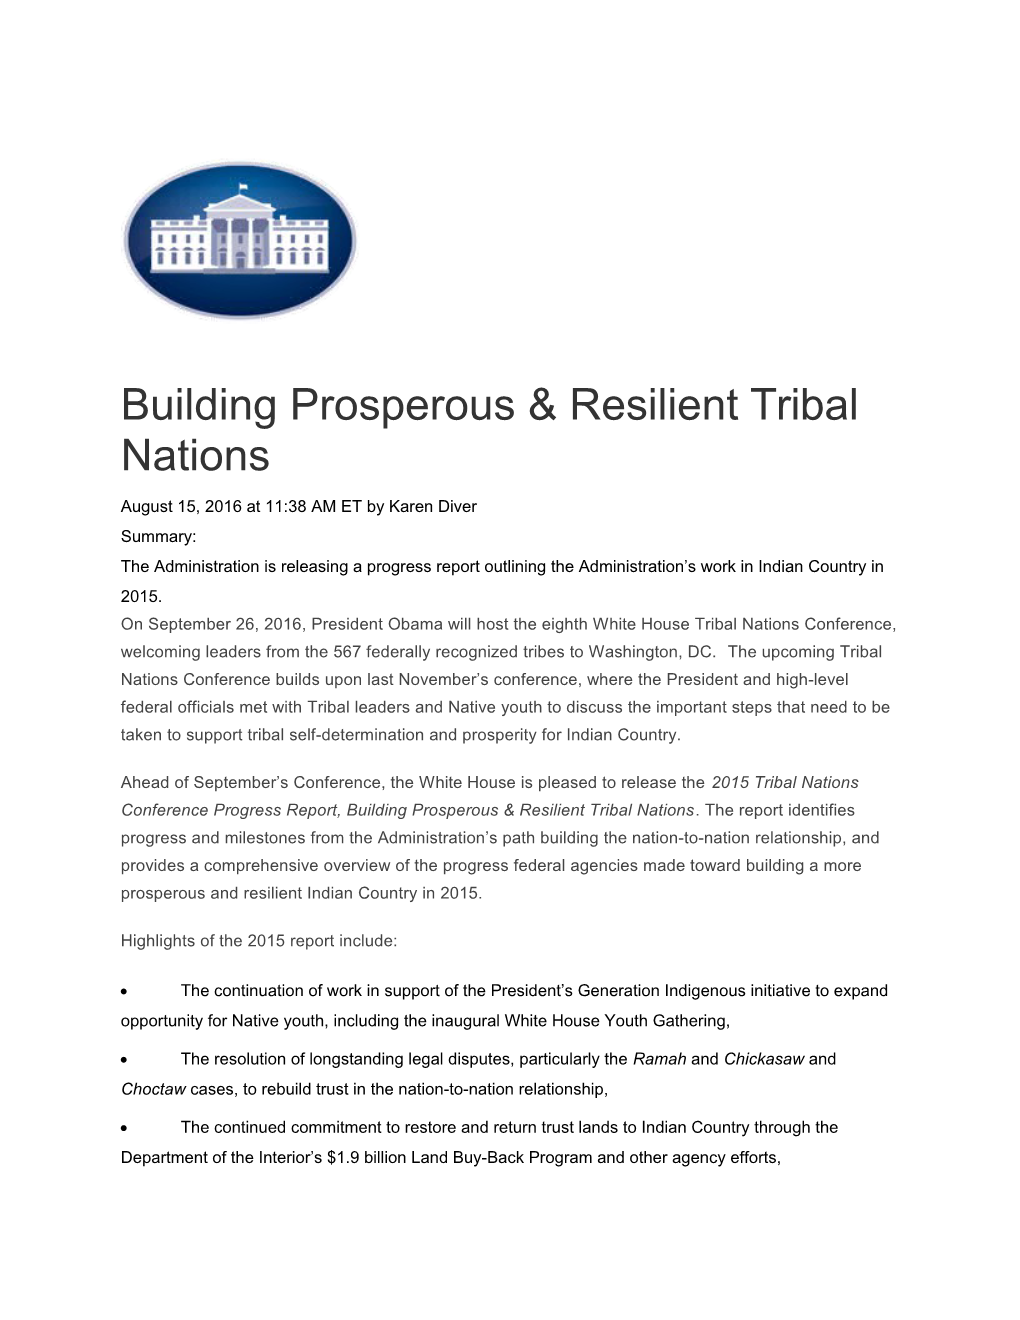 Building Prosperous & Resilient Tribal Nations